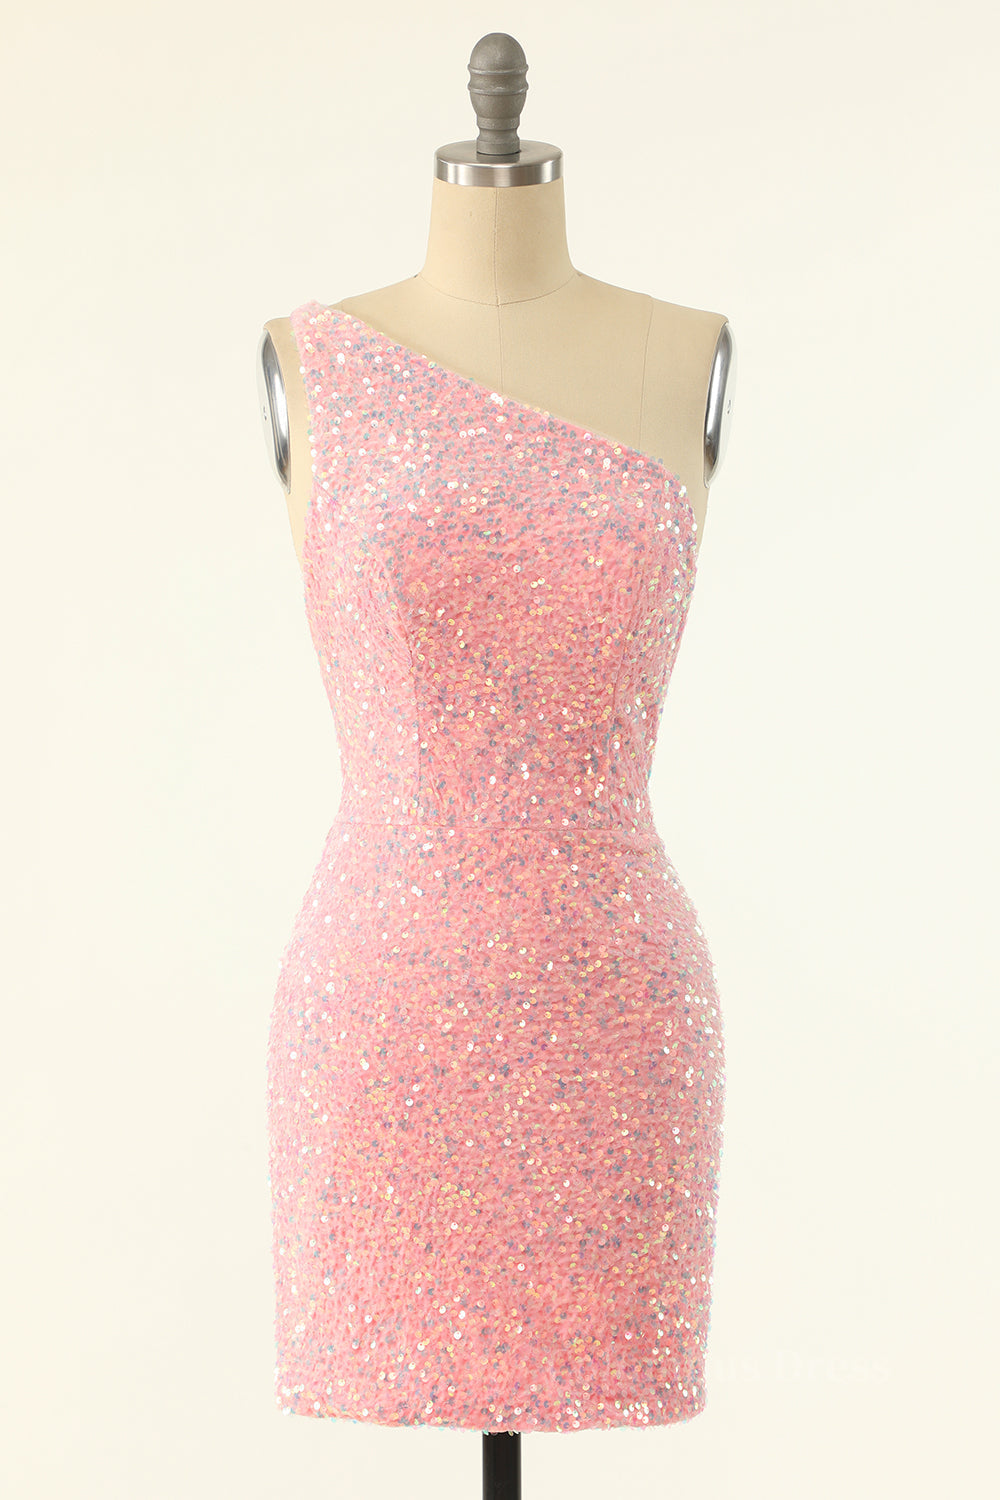 Party Dresses Outfit, One Shoulder Pink Sequin Bodycon Mini Dress